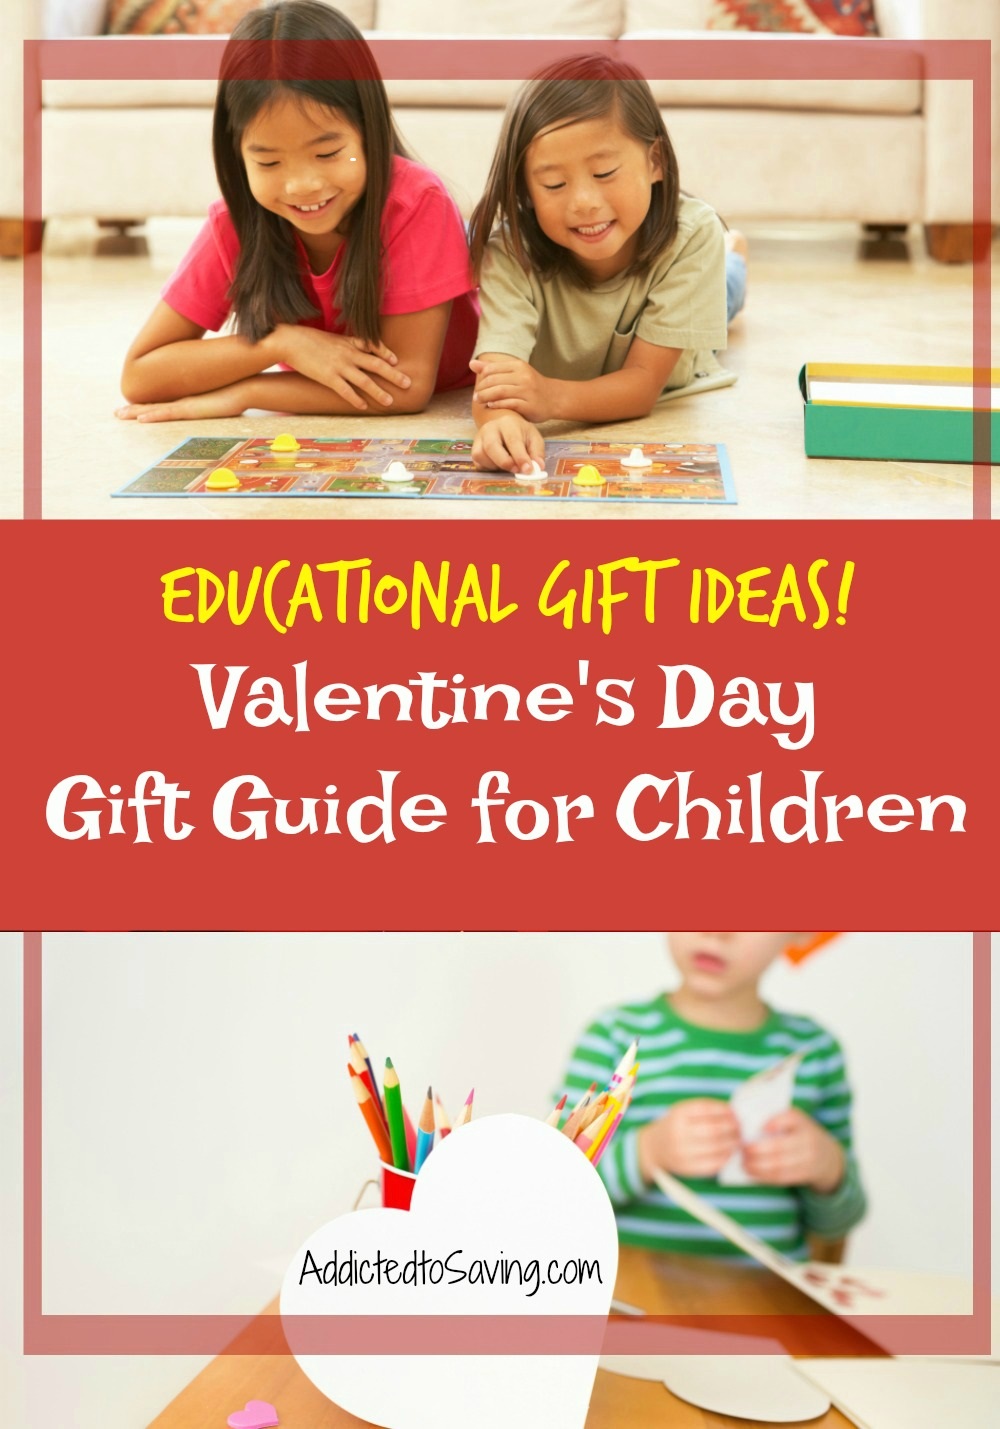 Valentines-day-Gift-Guide-for-Children